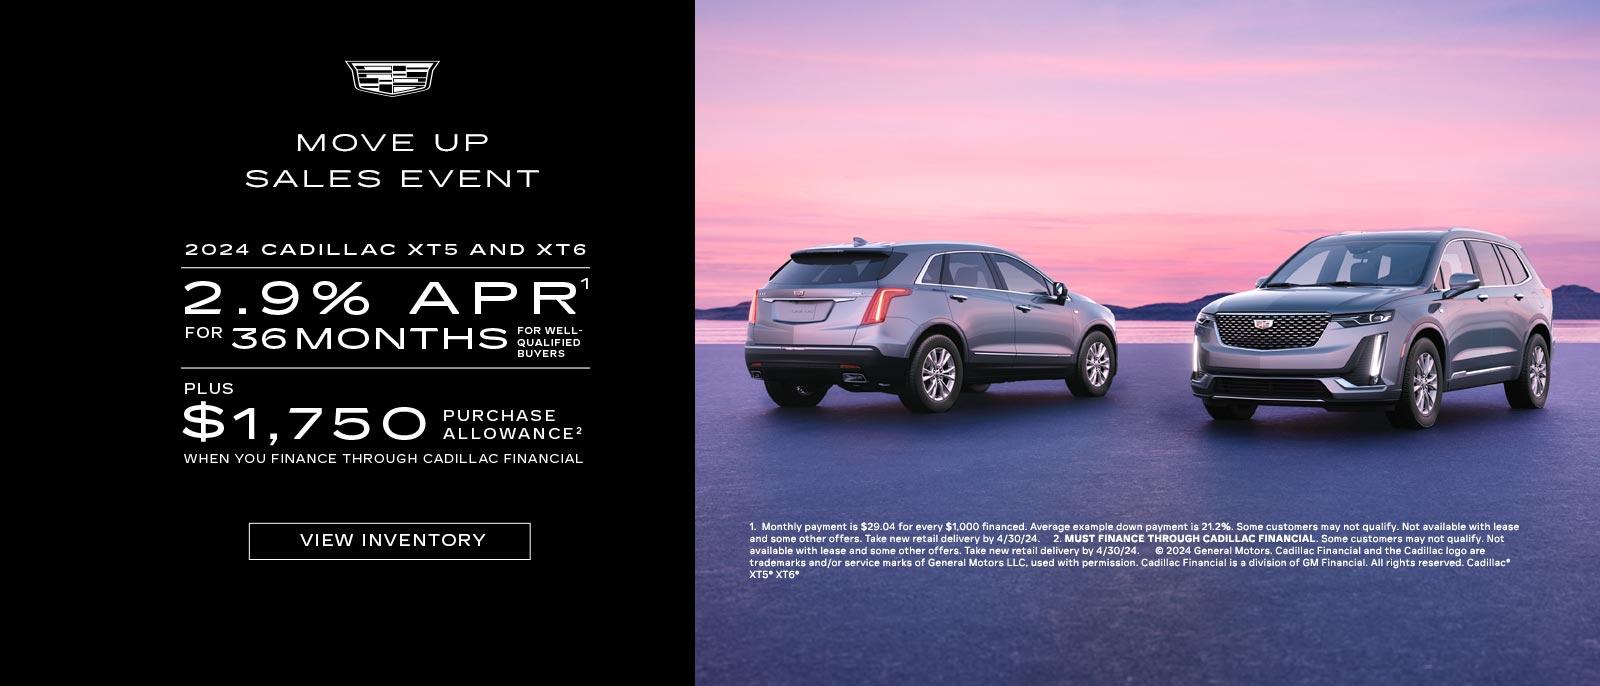 2024 CADILLAC XT5 AND XT6. 2.9% APR for 36 months for well qualified buyers. Plus $1,750 PURCHASE ALLOWANCE WHEN YOU FINANCE THROUGH CADILLAC FINANCIAL.